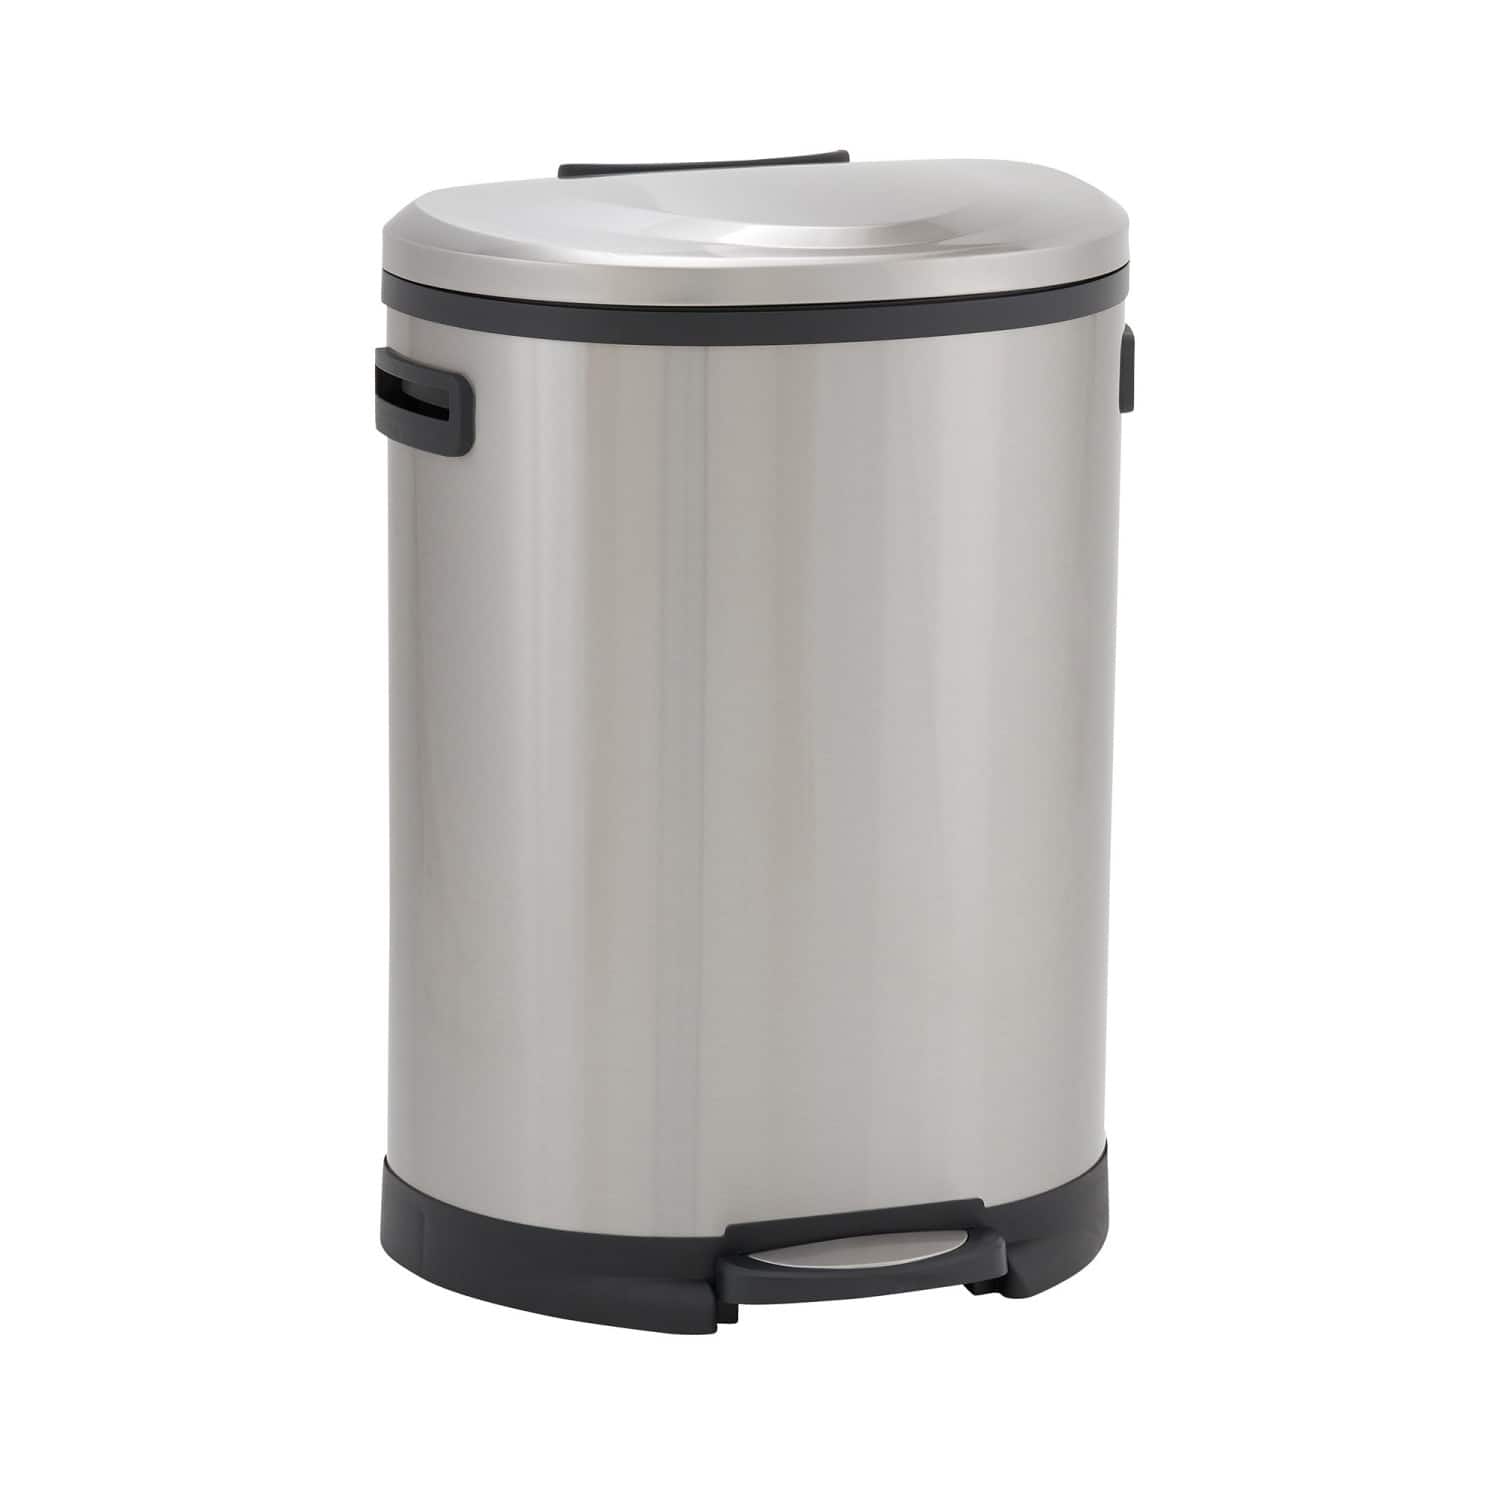 Household Essentials 13 gal. Stainless Steel Oval Trash Can with Step